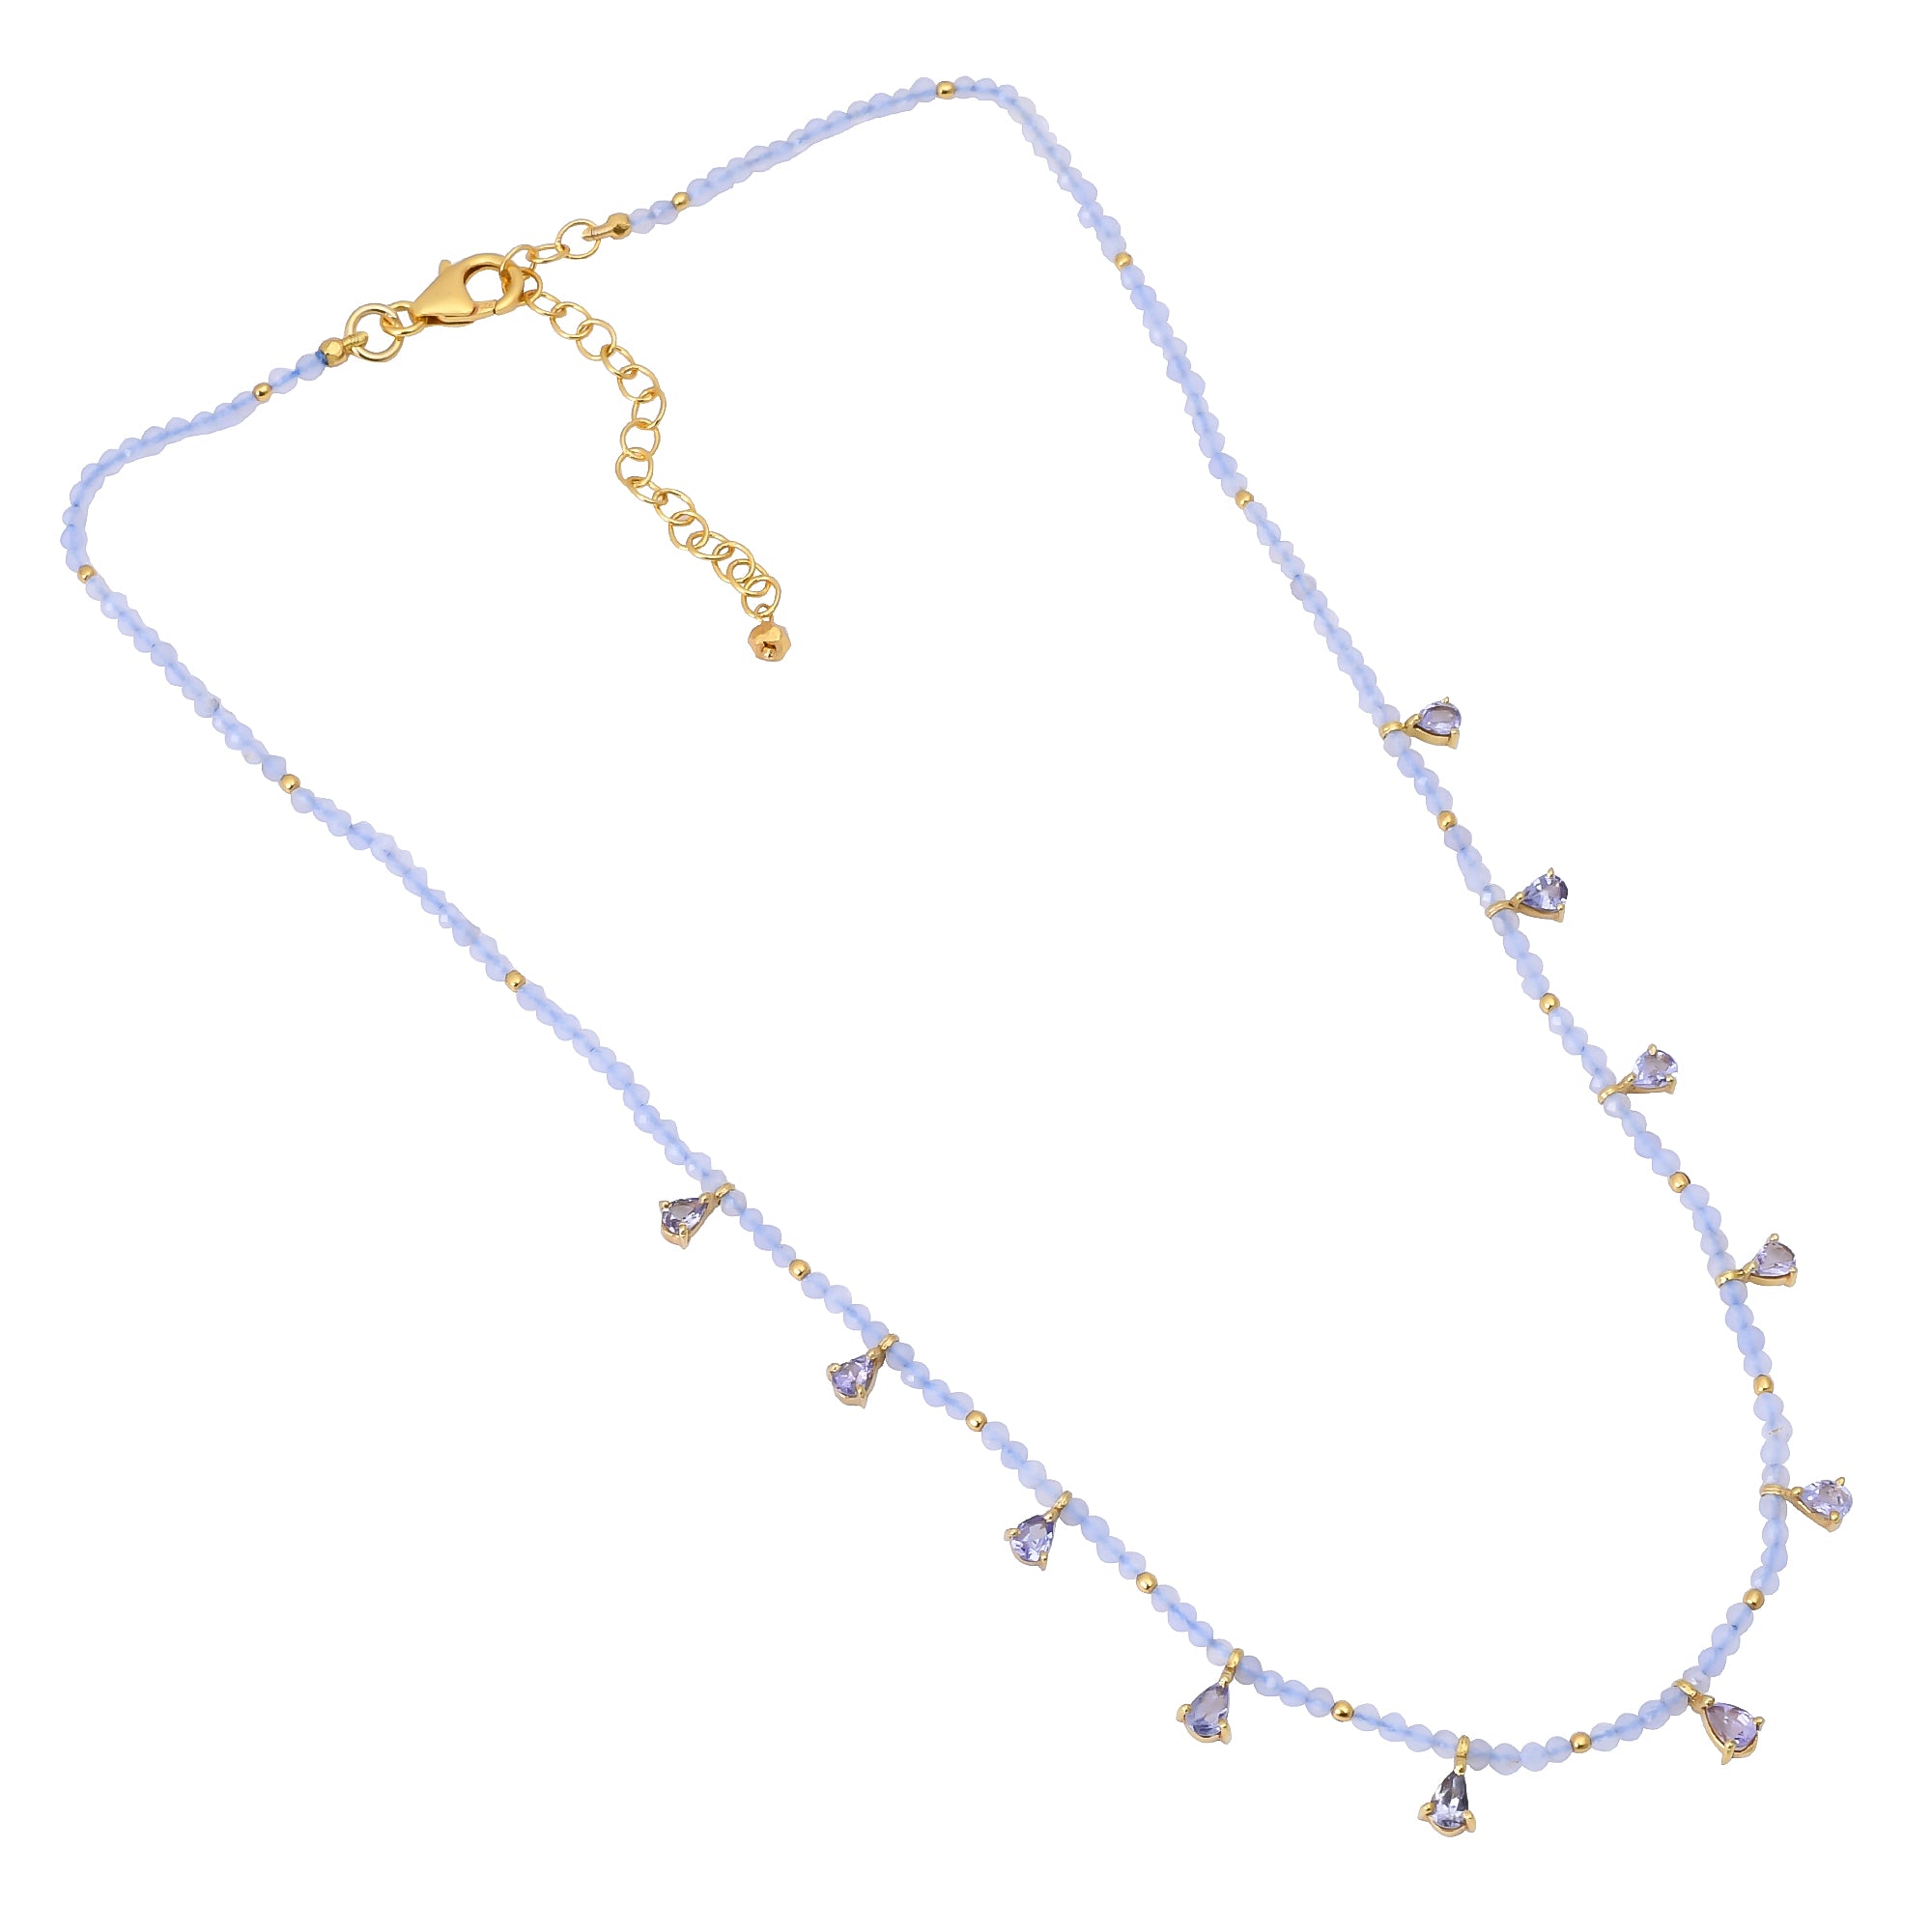 Silver Gold Plated Tanzanite and Chalcedony Necklace